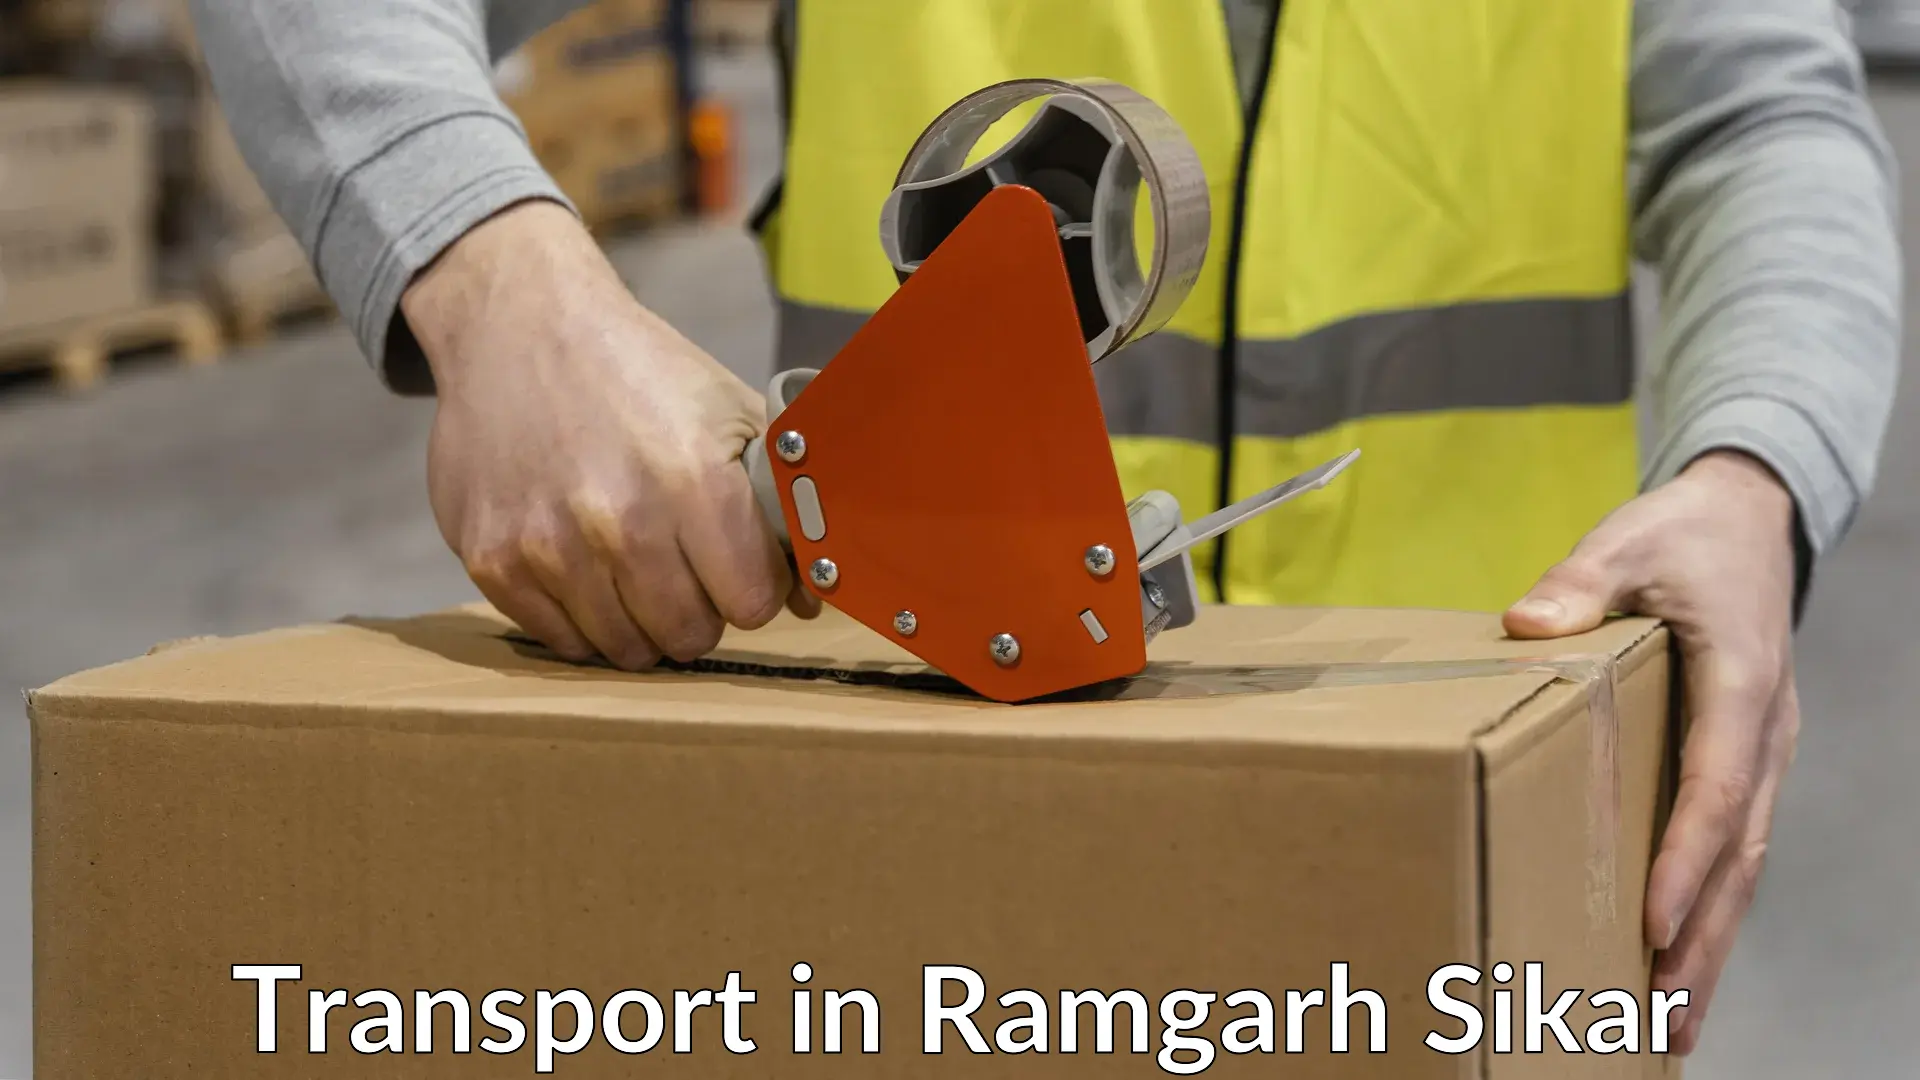 Vehicle courier services in Ramgarh Sikar